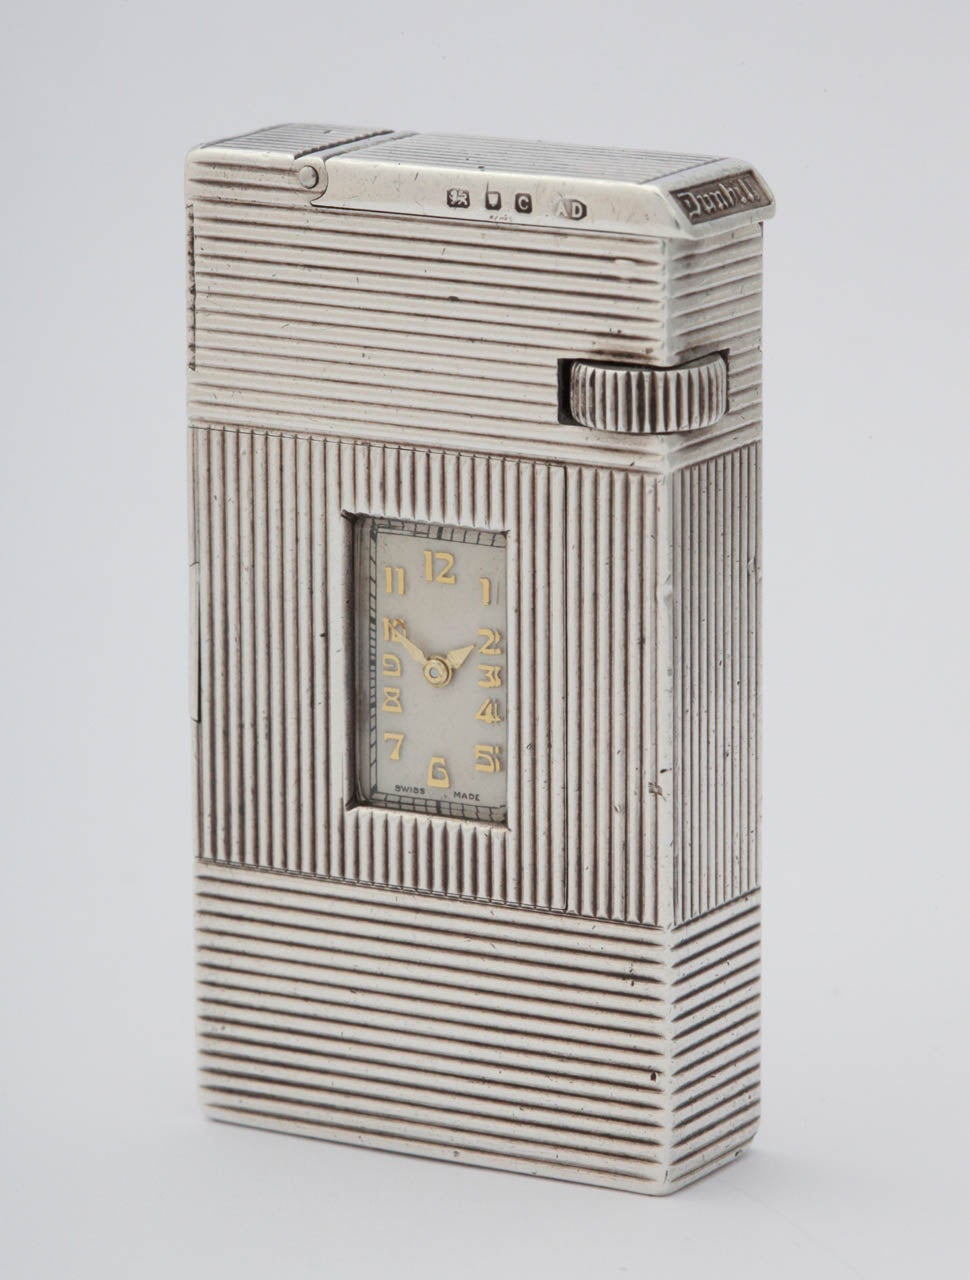 Sterling silver Dunhill Broadboy lighter with watch. Ribbed design with integral watch. Watch has a silvered dial with Arabic numerals. Marked Dunhill with silver hallmarks. 1938. 
Dimensions are 58mm / 32mm / 12mm.